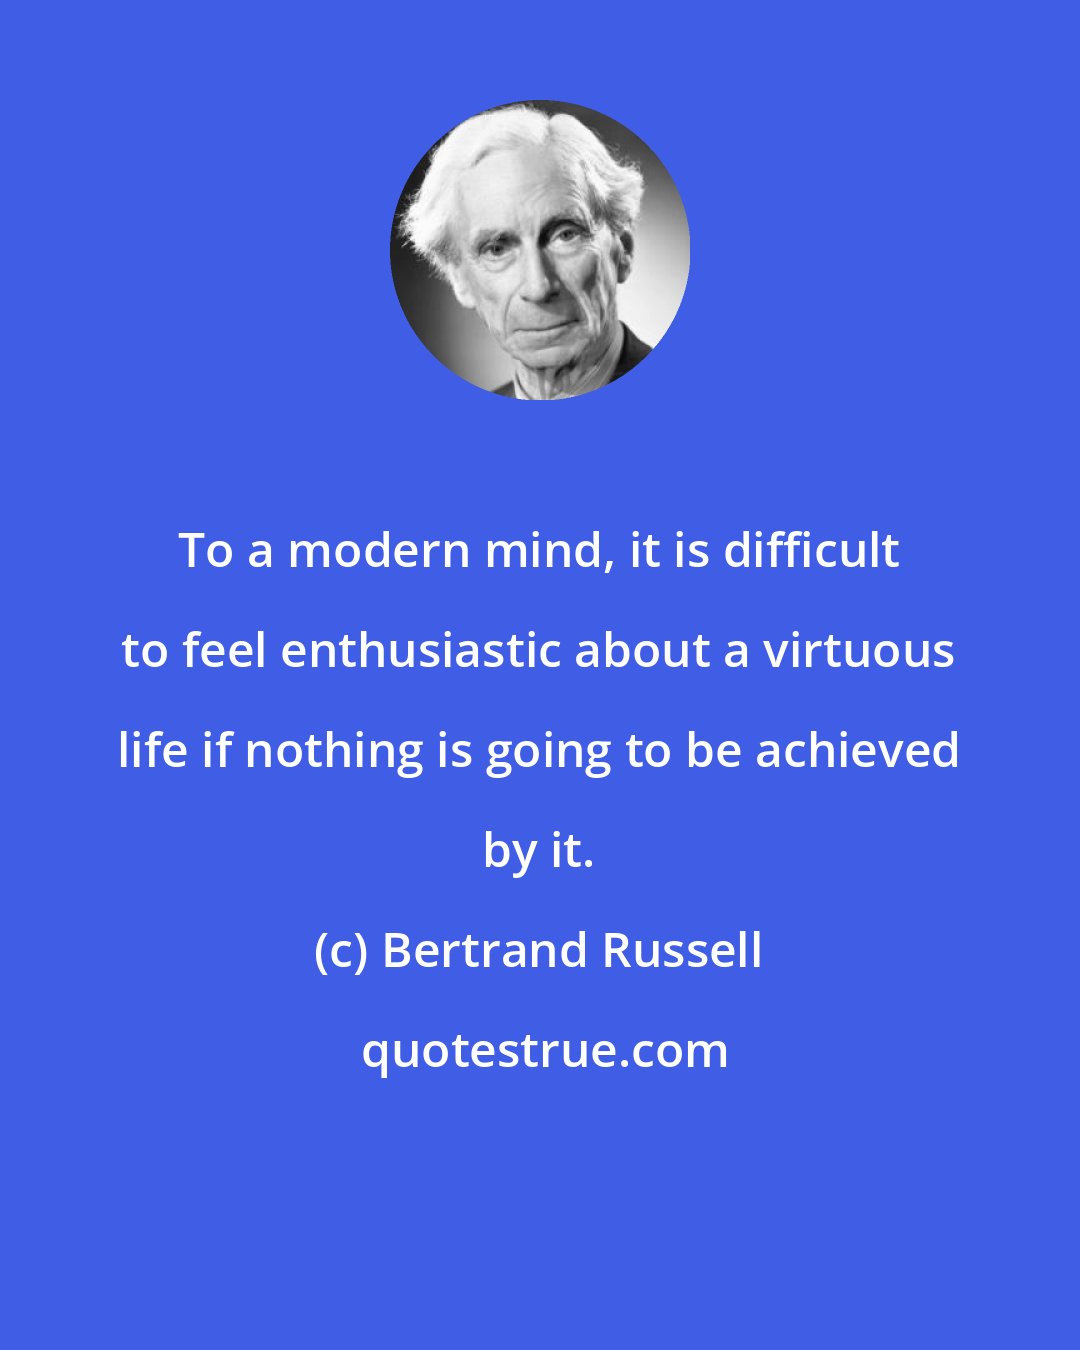 Bertrand Russell: To a modern mind, it is difficult to feel enthusiastic about a virtuous life if nothing is going to be achieved by it.